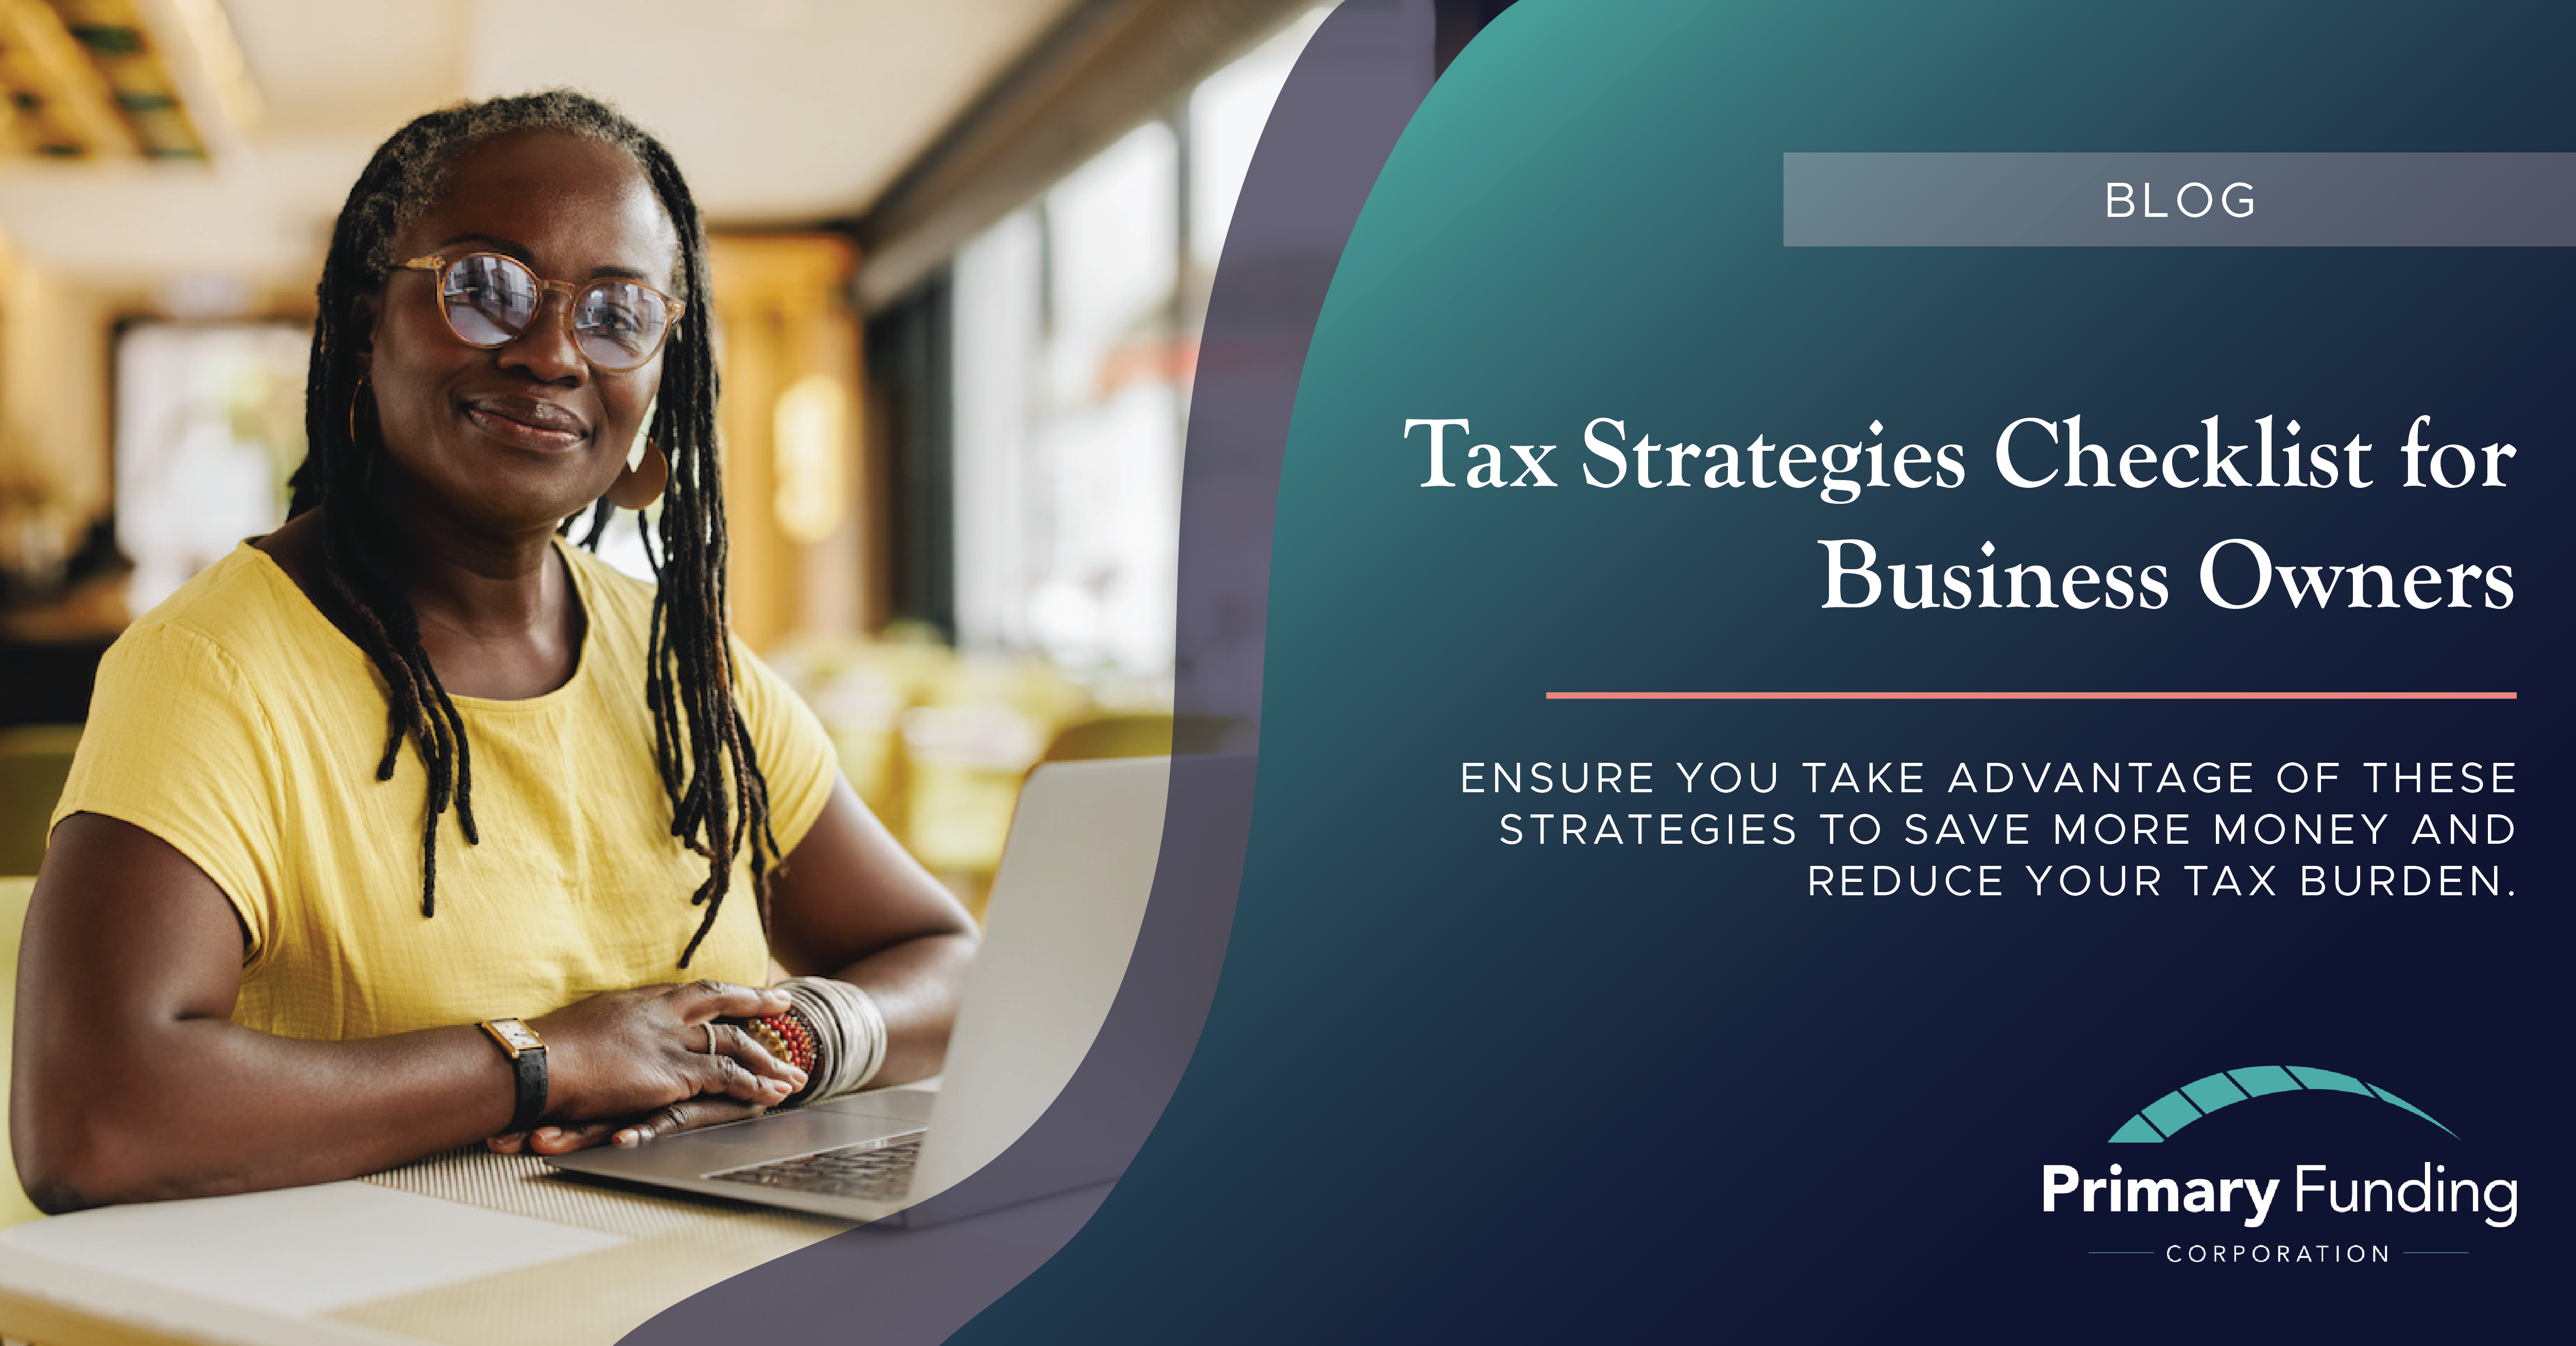 Tax Strategies Checklist for Business Owners post image